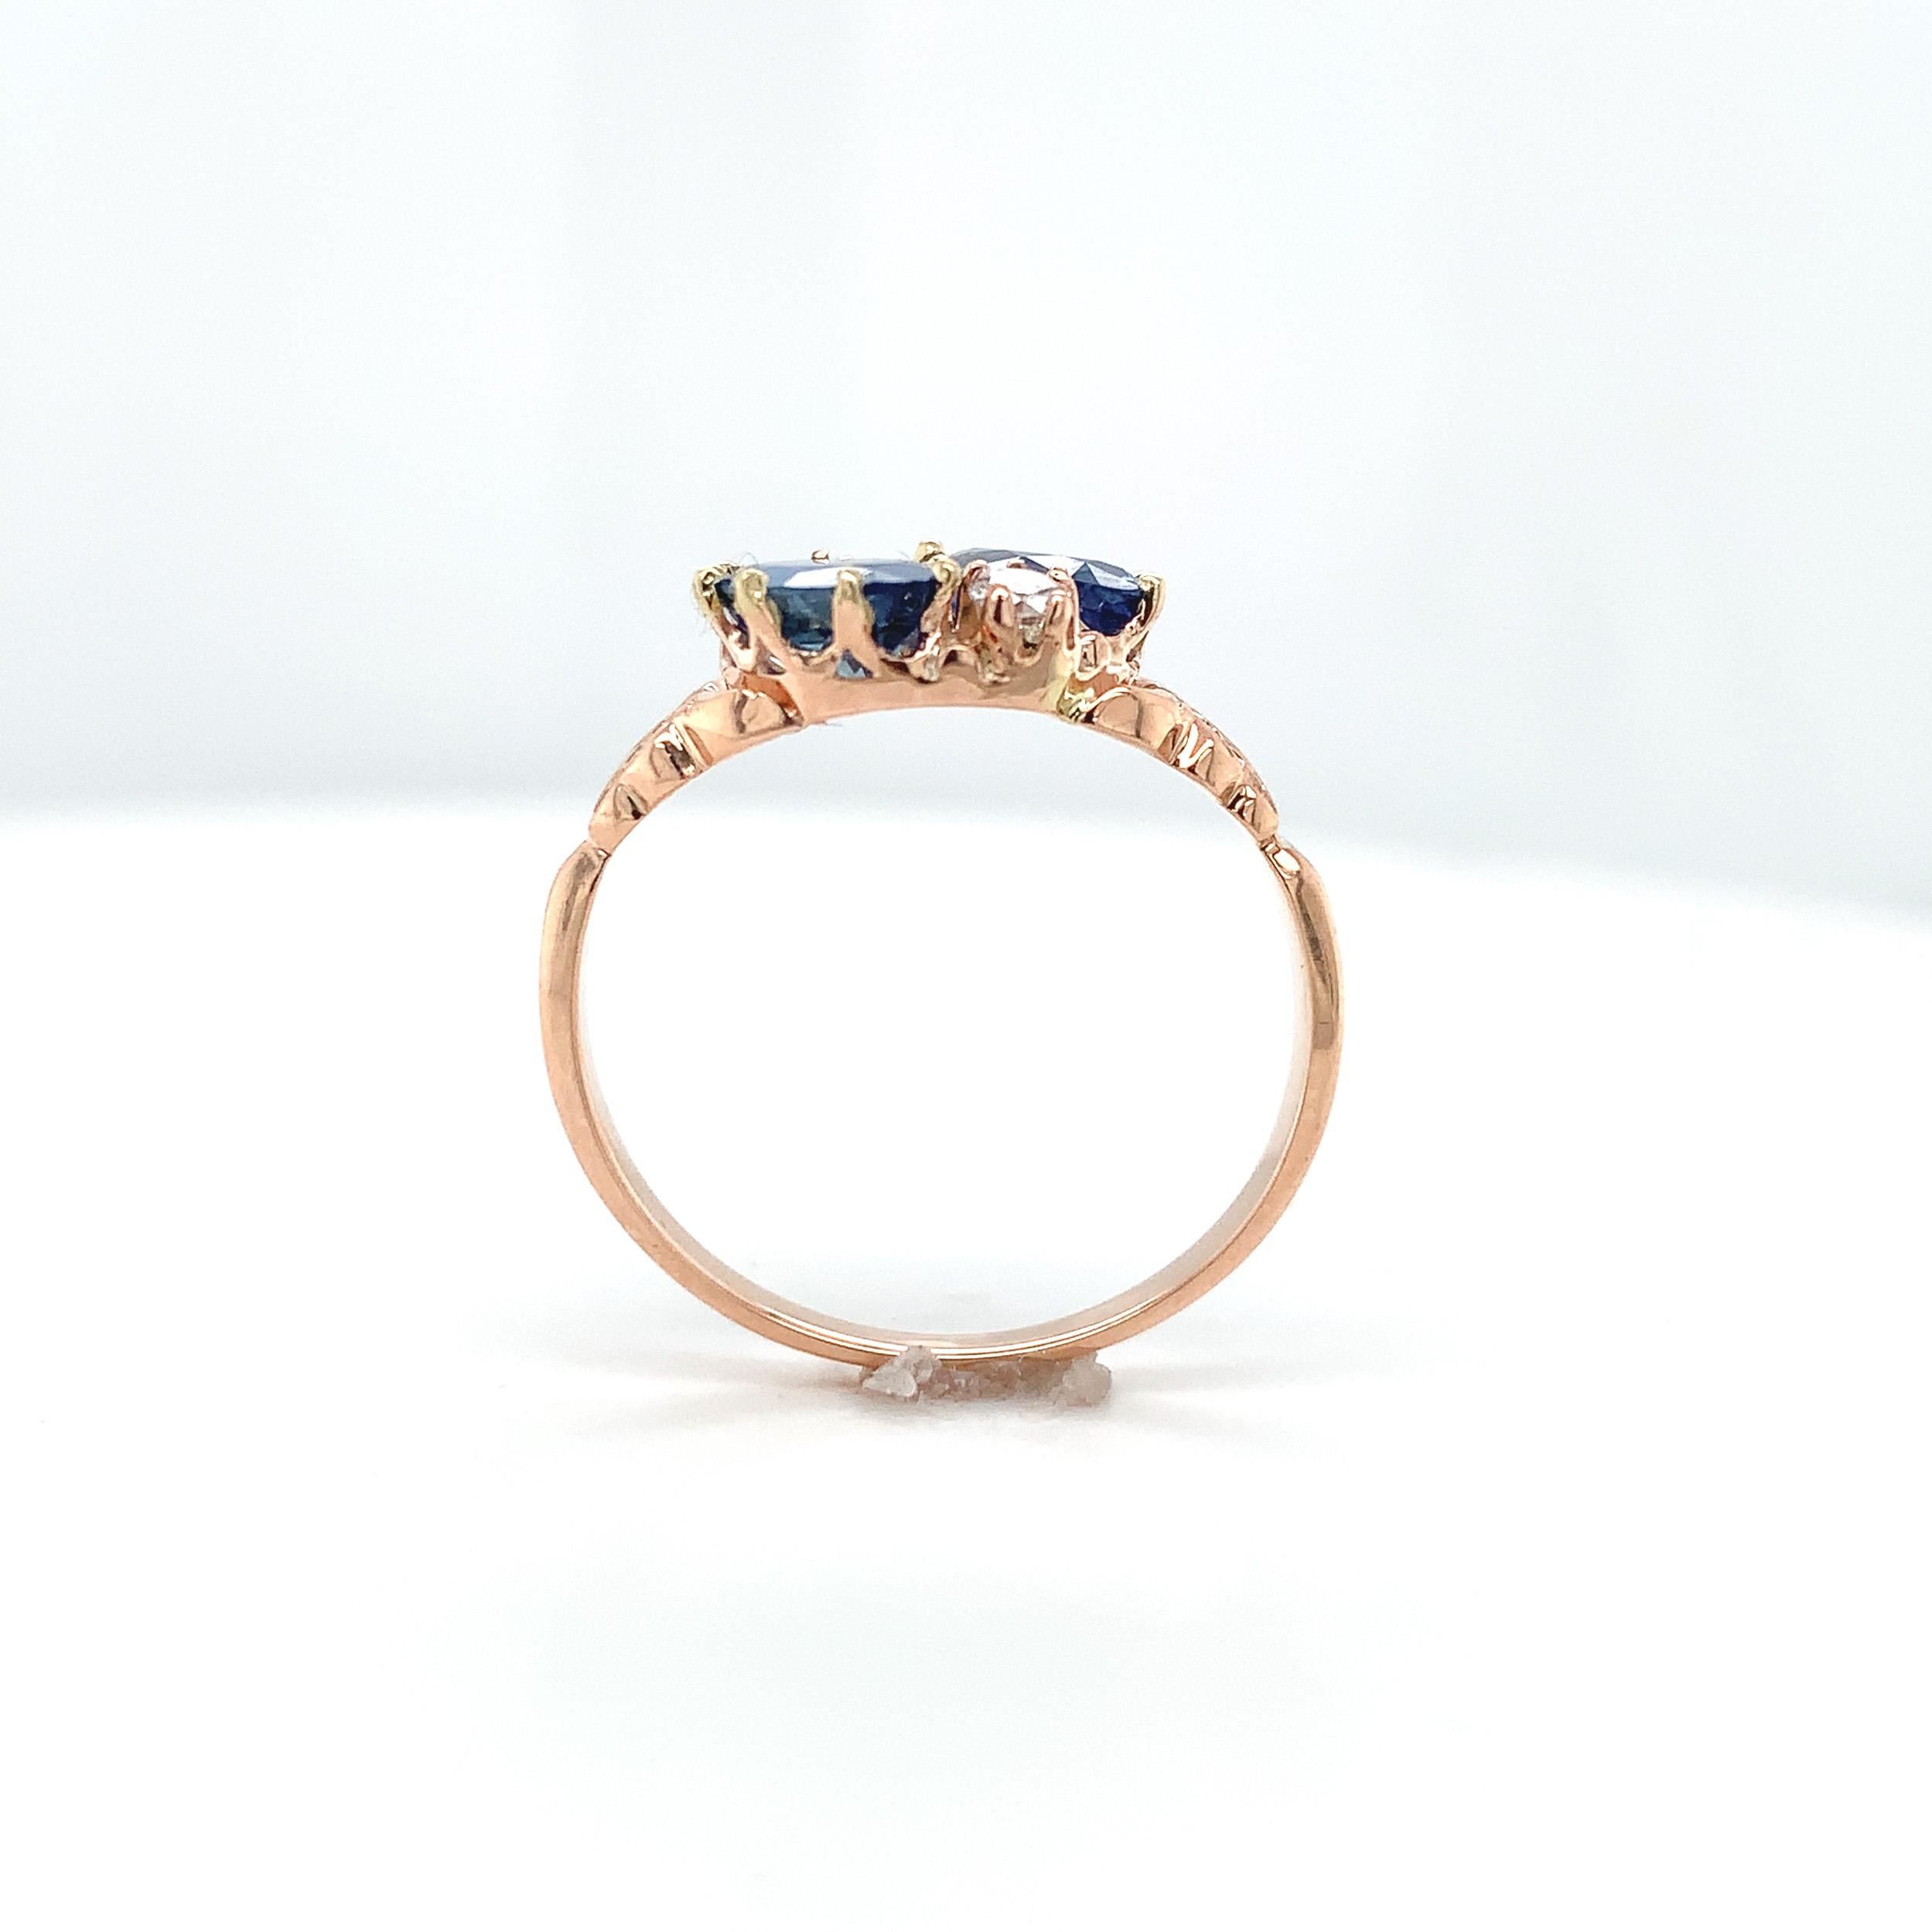 Victorian 10K rose gold ring featuring 2 oval blue sapphires.  The sapphires weigh 1.65 carats total. The sapphires are medium dark color and measure about 7mm x 5mm. There are 2 small round brilliant cut diamonds measuring about 2.2mm. The ring